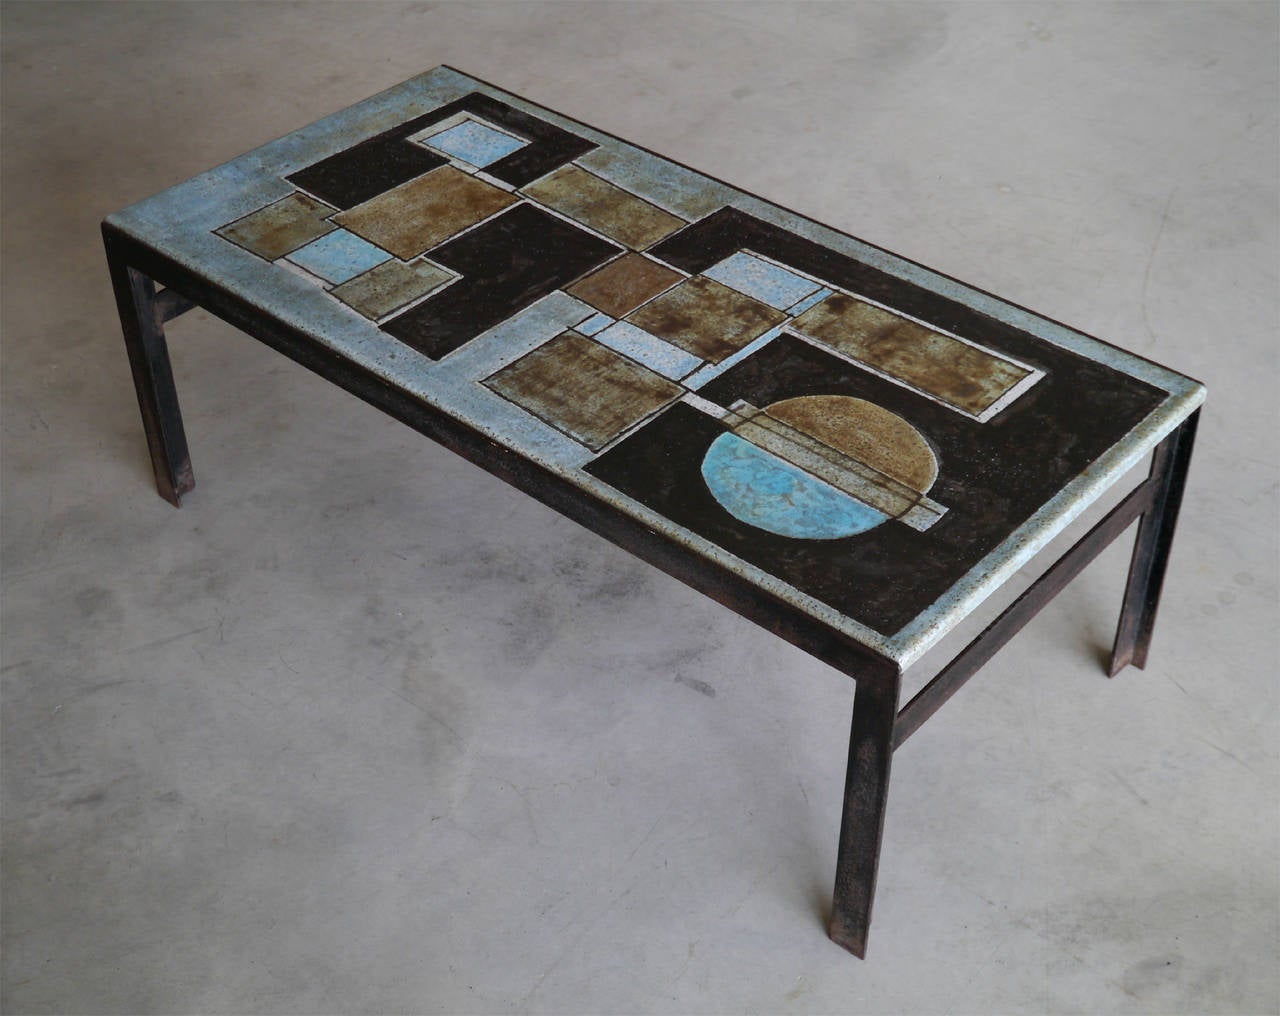 A very rare rectangular table consisted with an exceptional single panel of lava glazed mounted on its elegant and original metal frame.

Signed by the Artists.